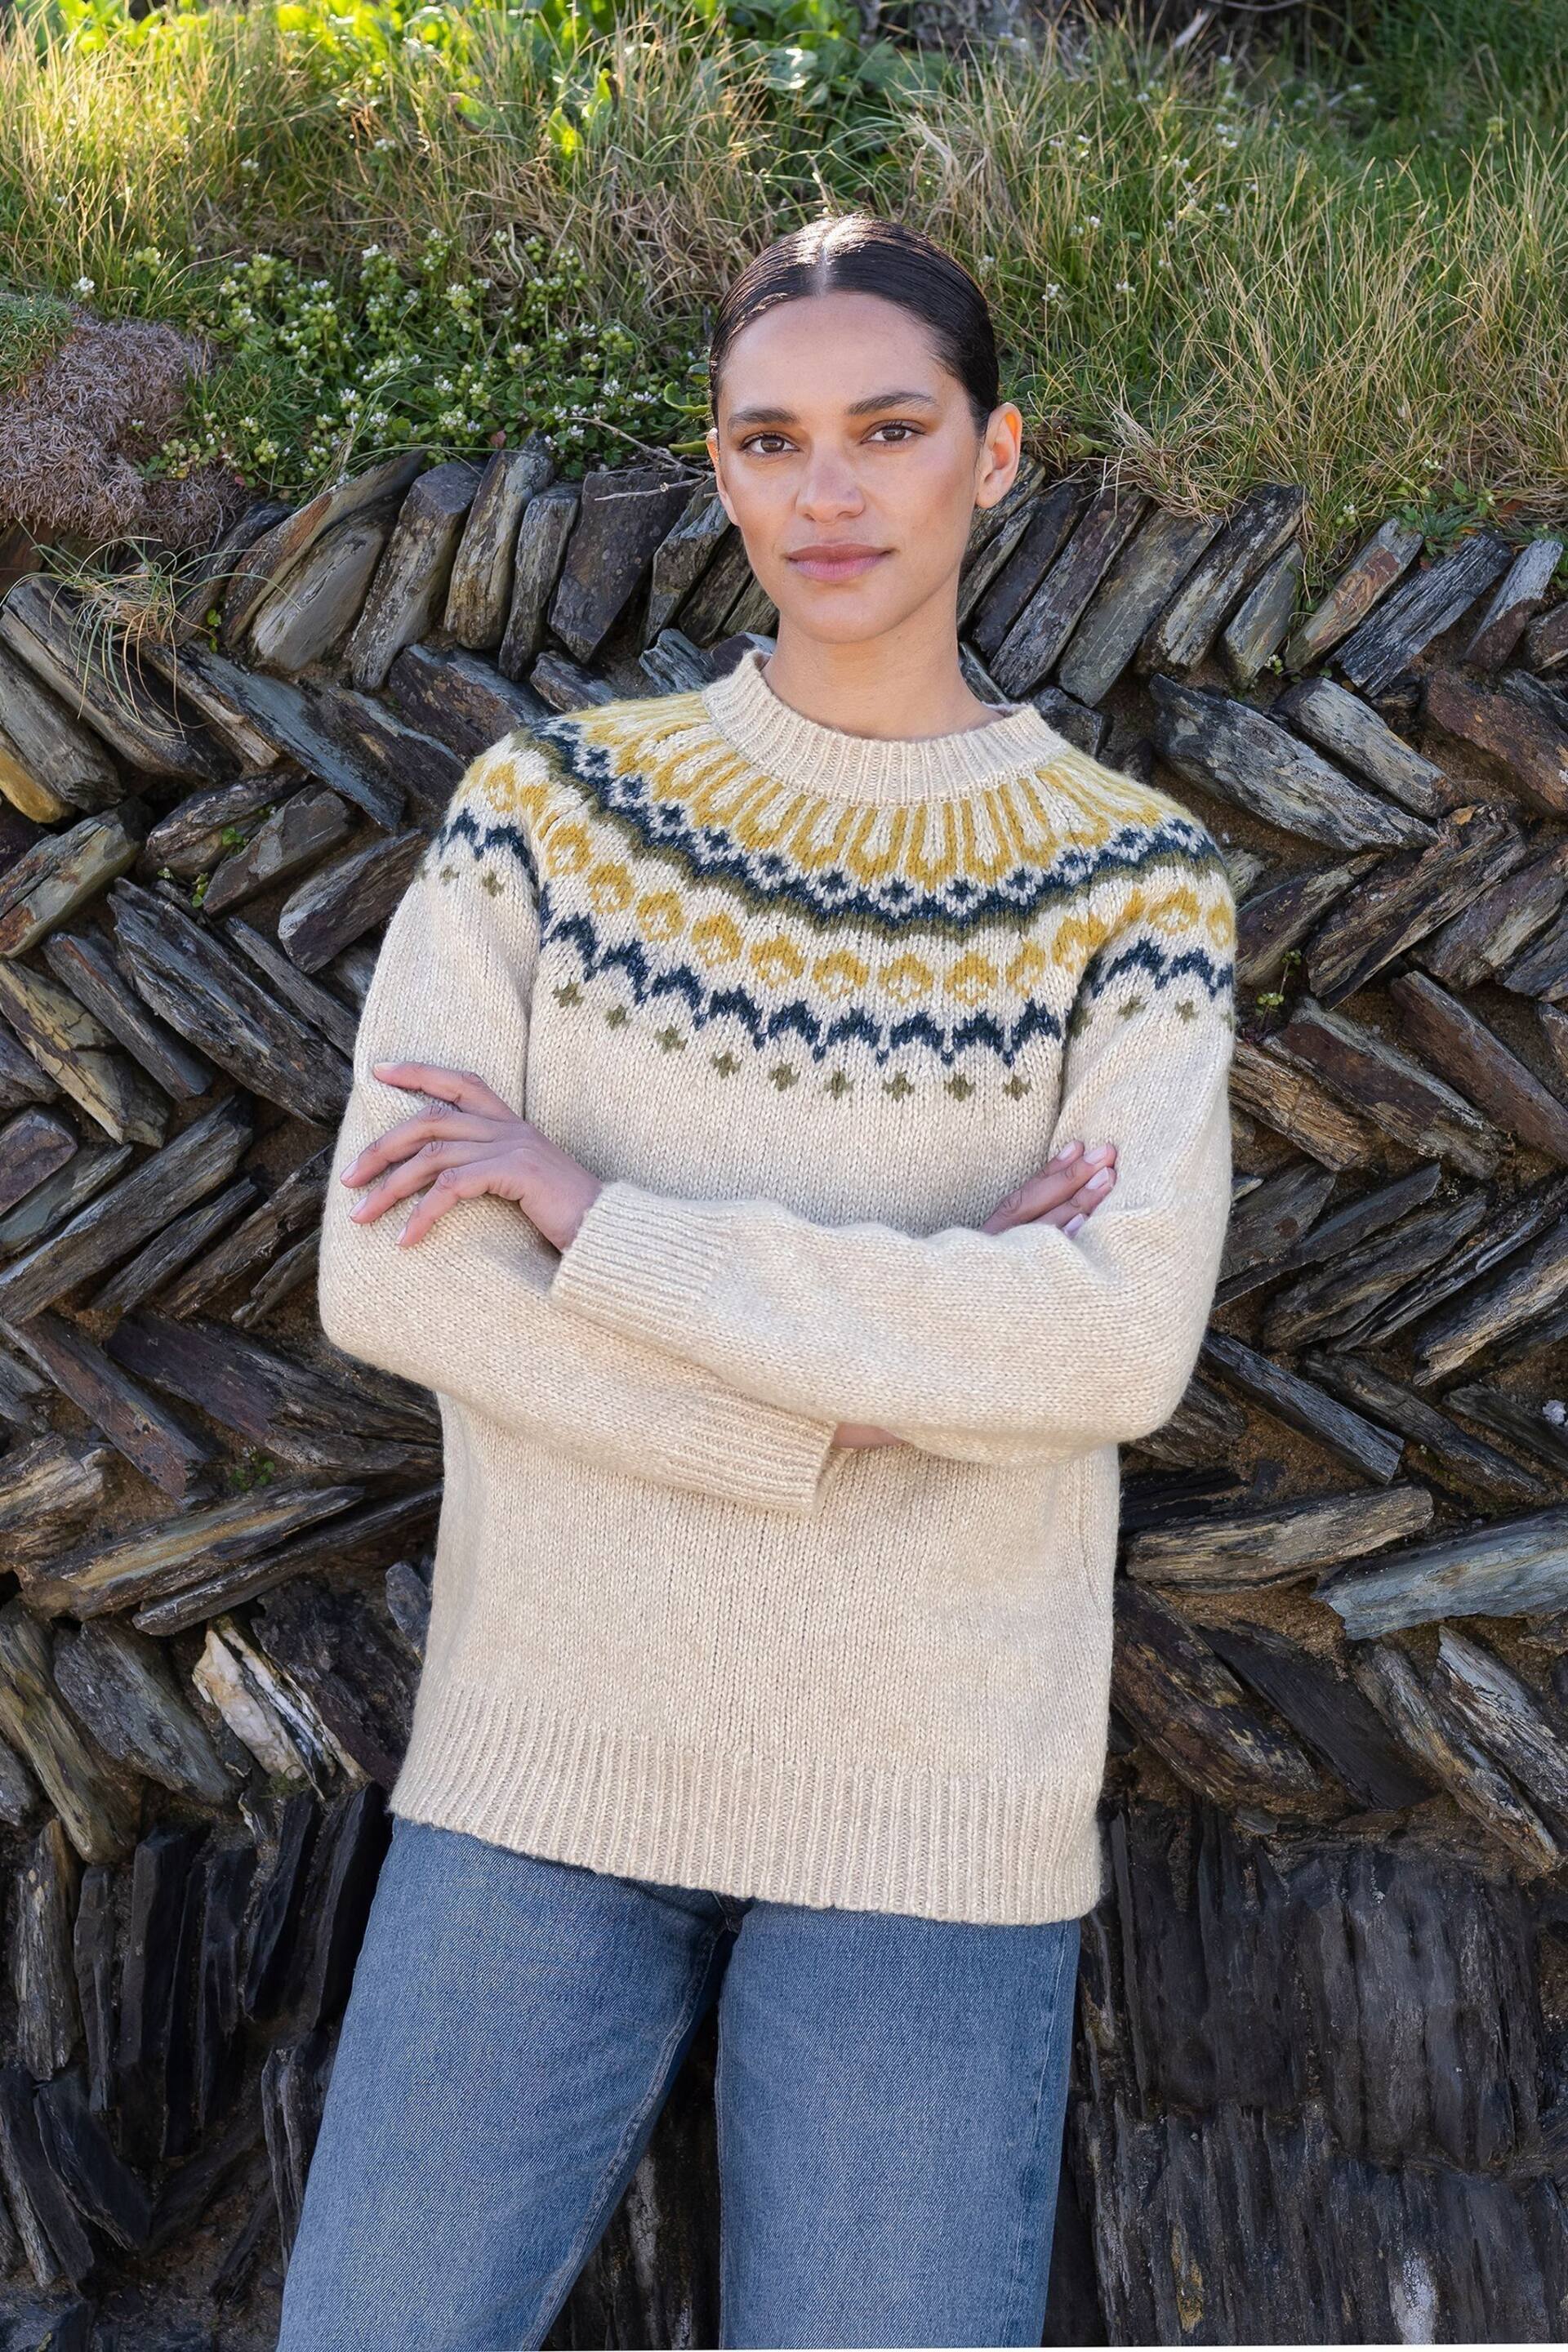 Celtic & Co. Natural Luxe Fair Isle Jumper - Image 1 of 6